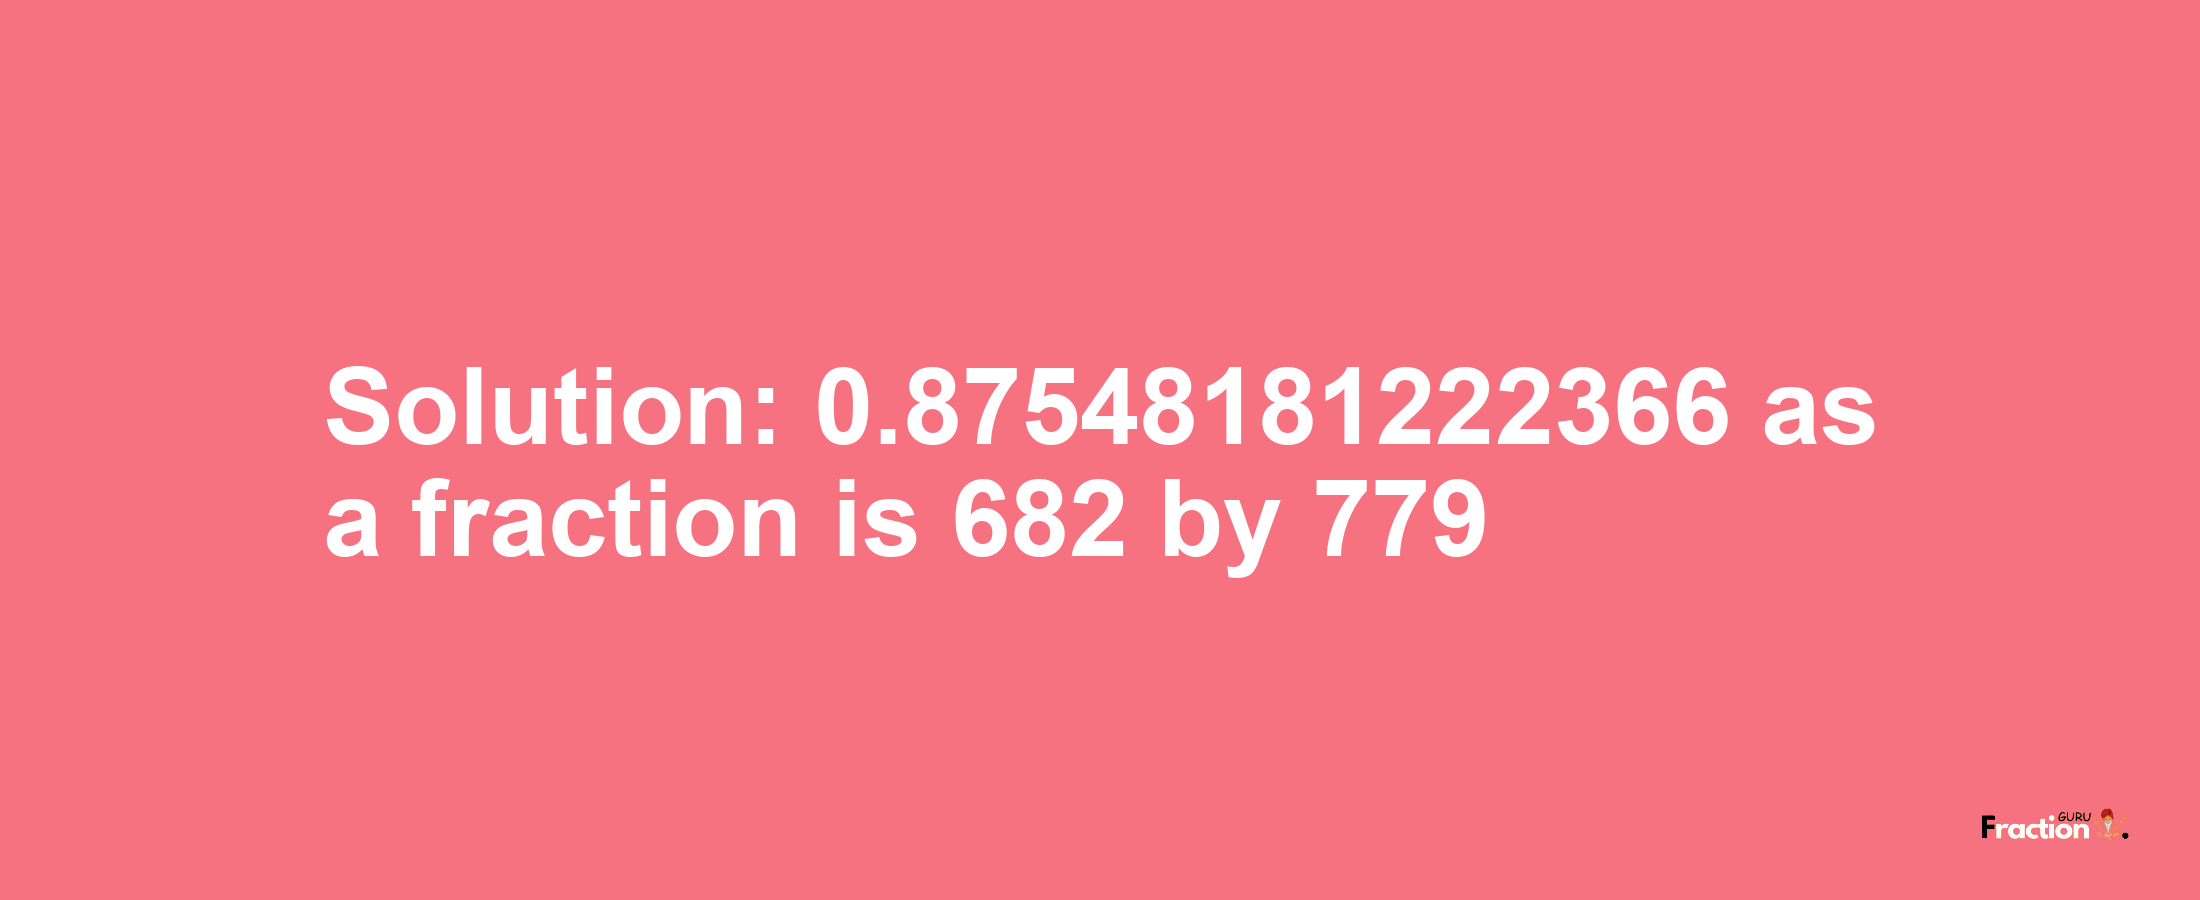 Solution:0.87548181222366 as a fraction is 682/779